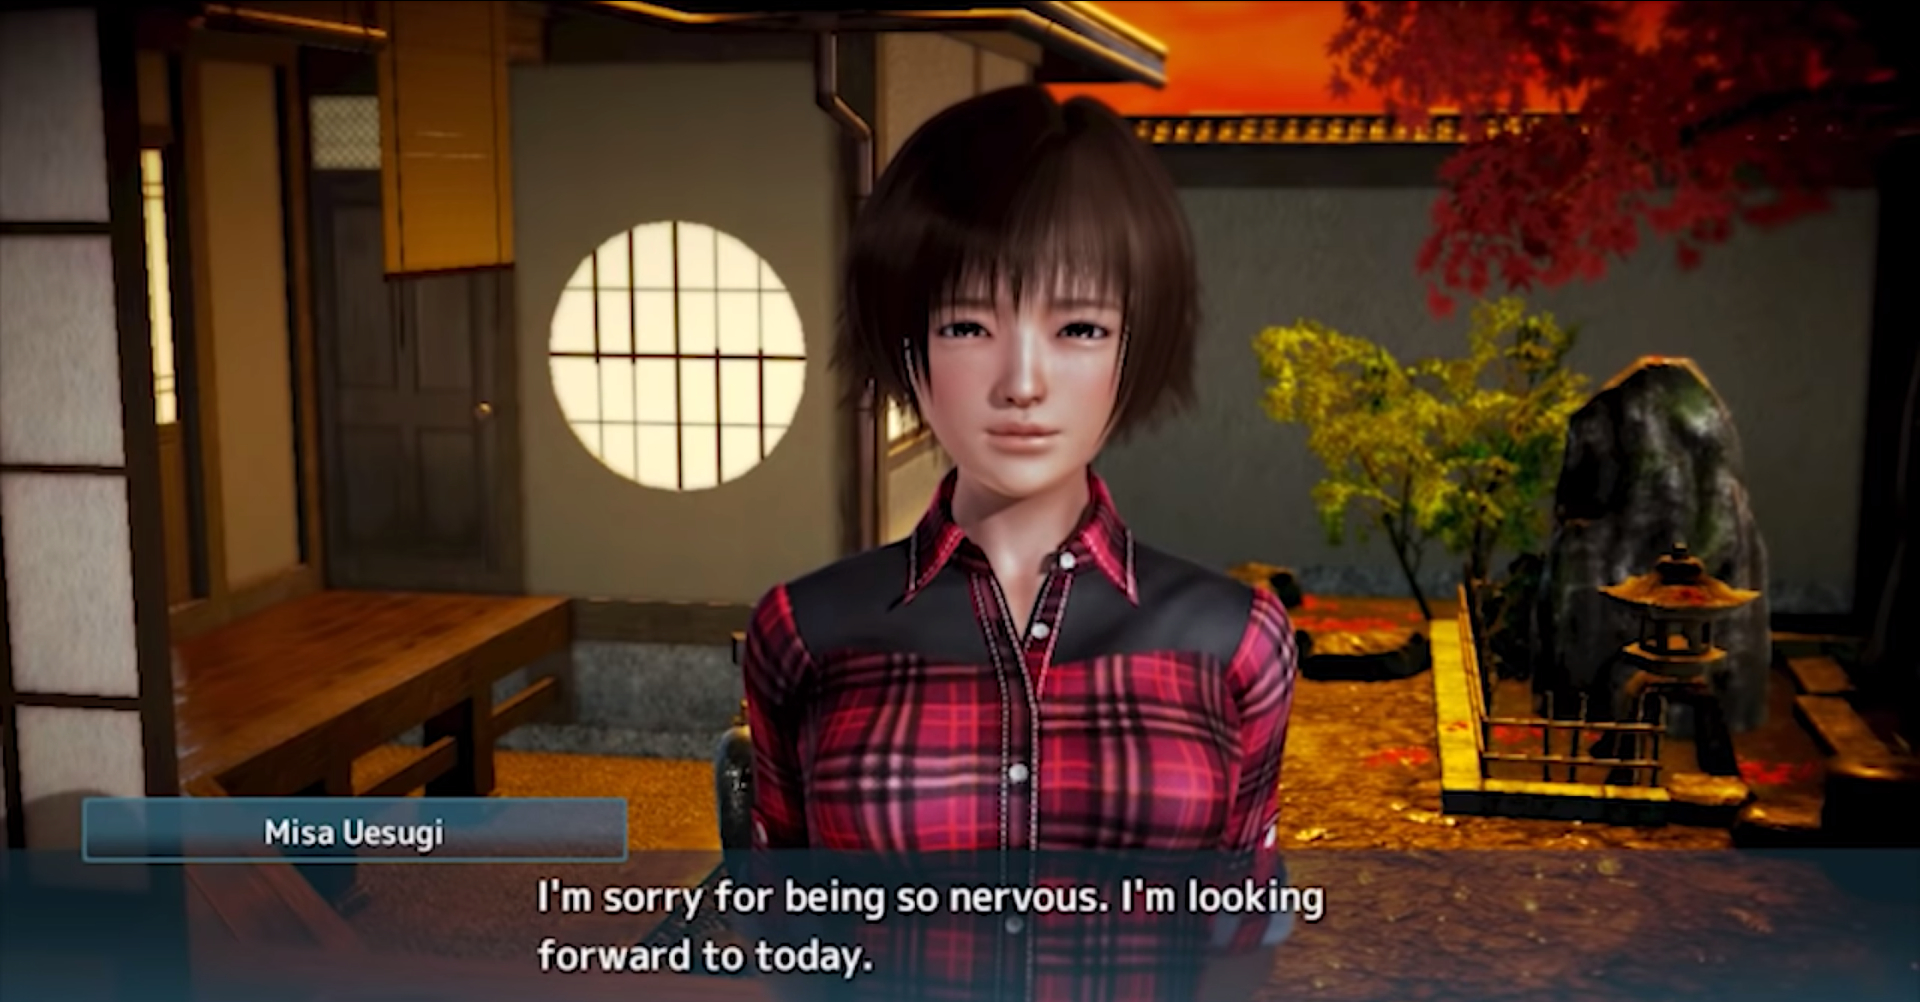 honey select english translation all in one